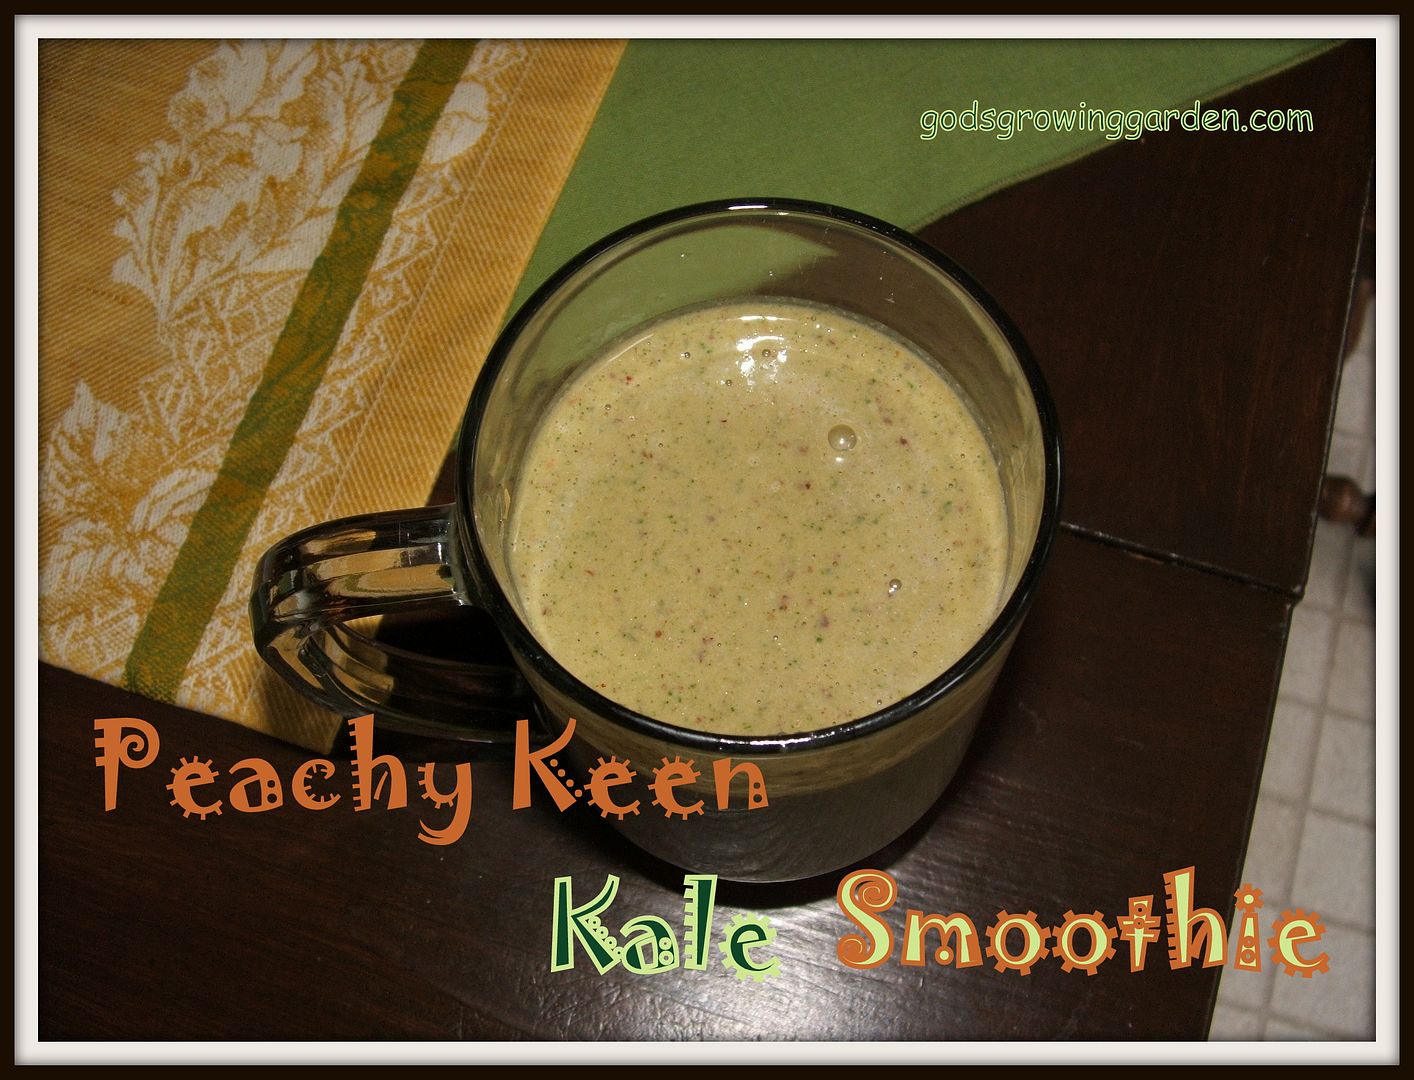 Peachy Keen Kale Smoothie by Angie Ouellette-Tower for godsgrowinggarden.com photo 015-4_zps7a7efec5.jpg